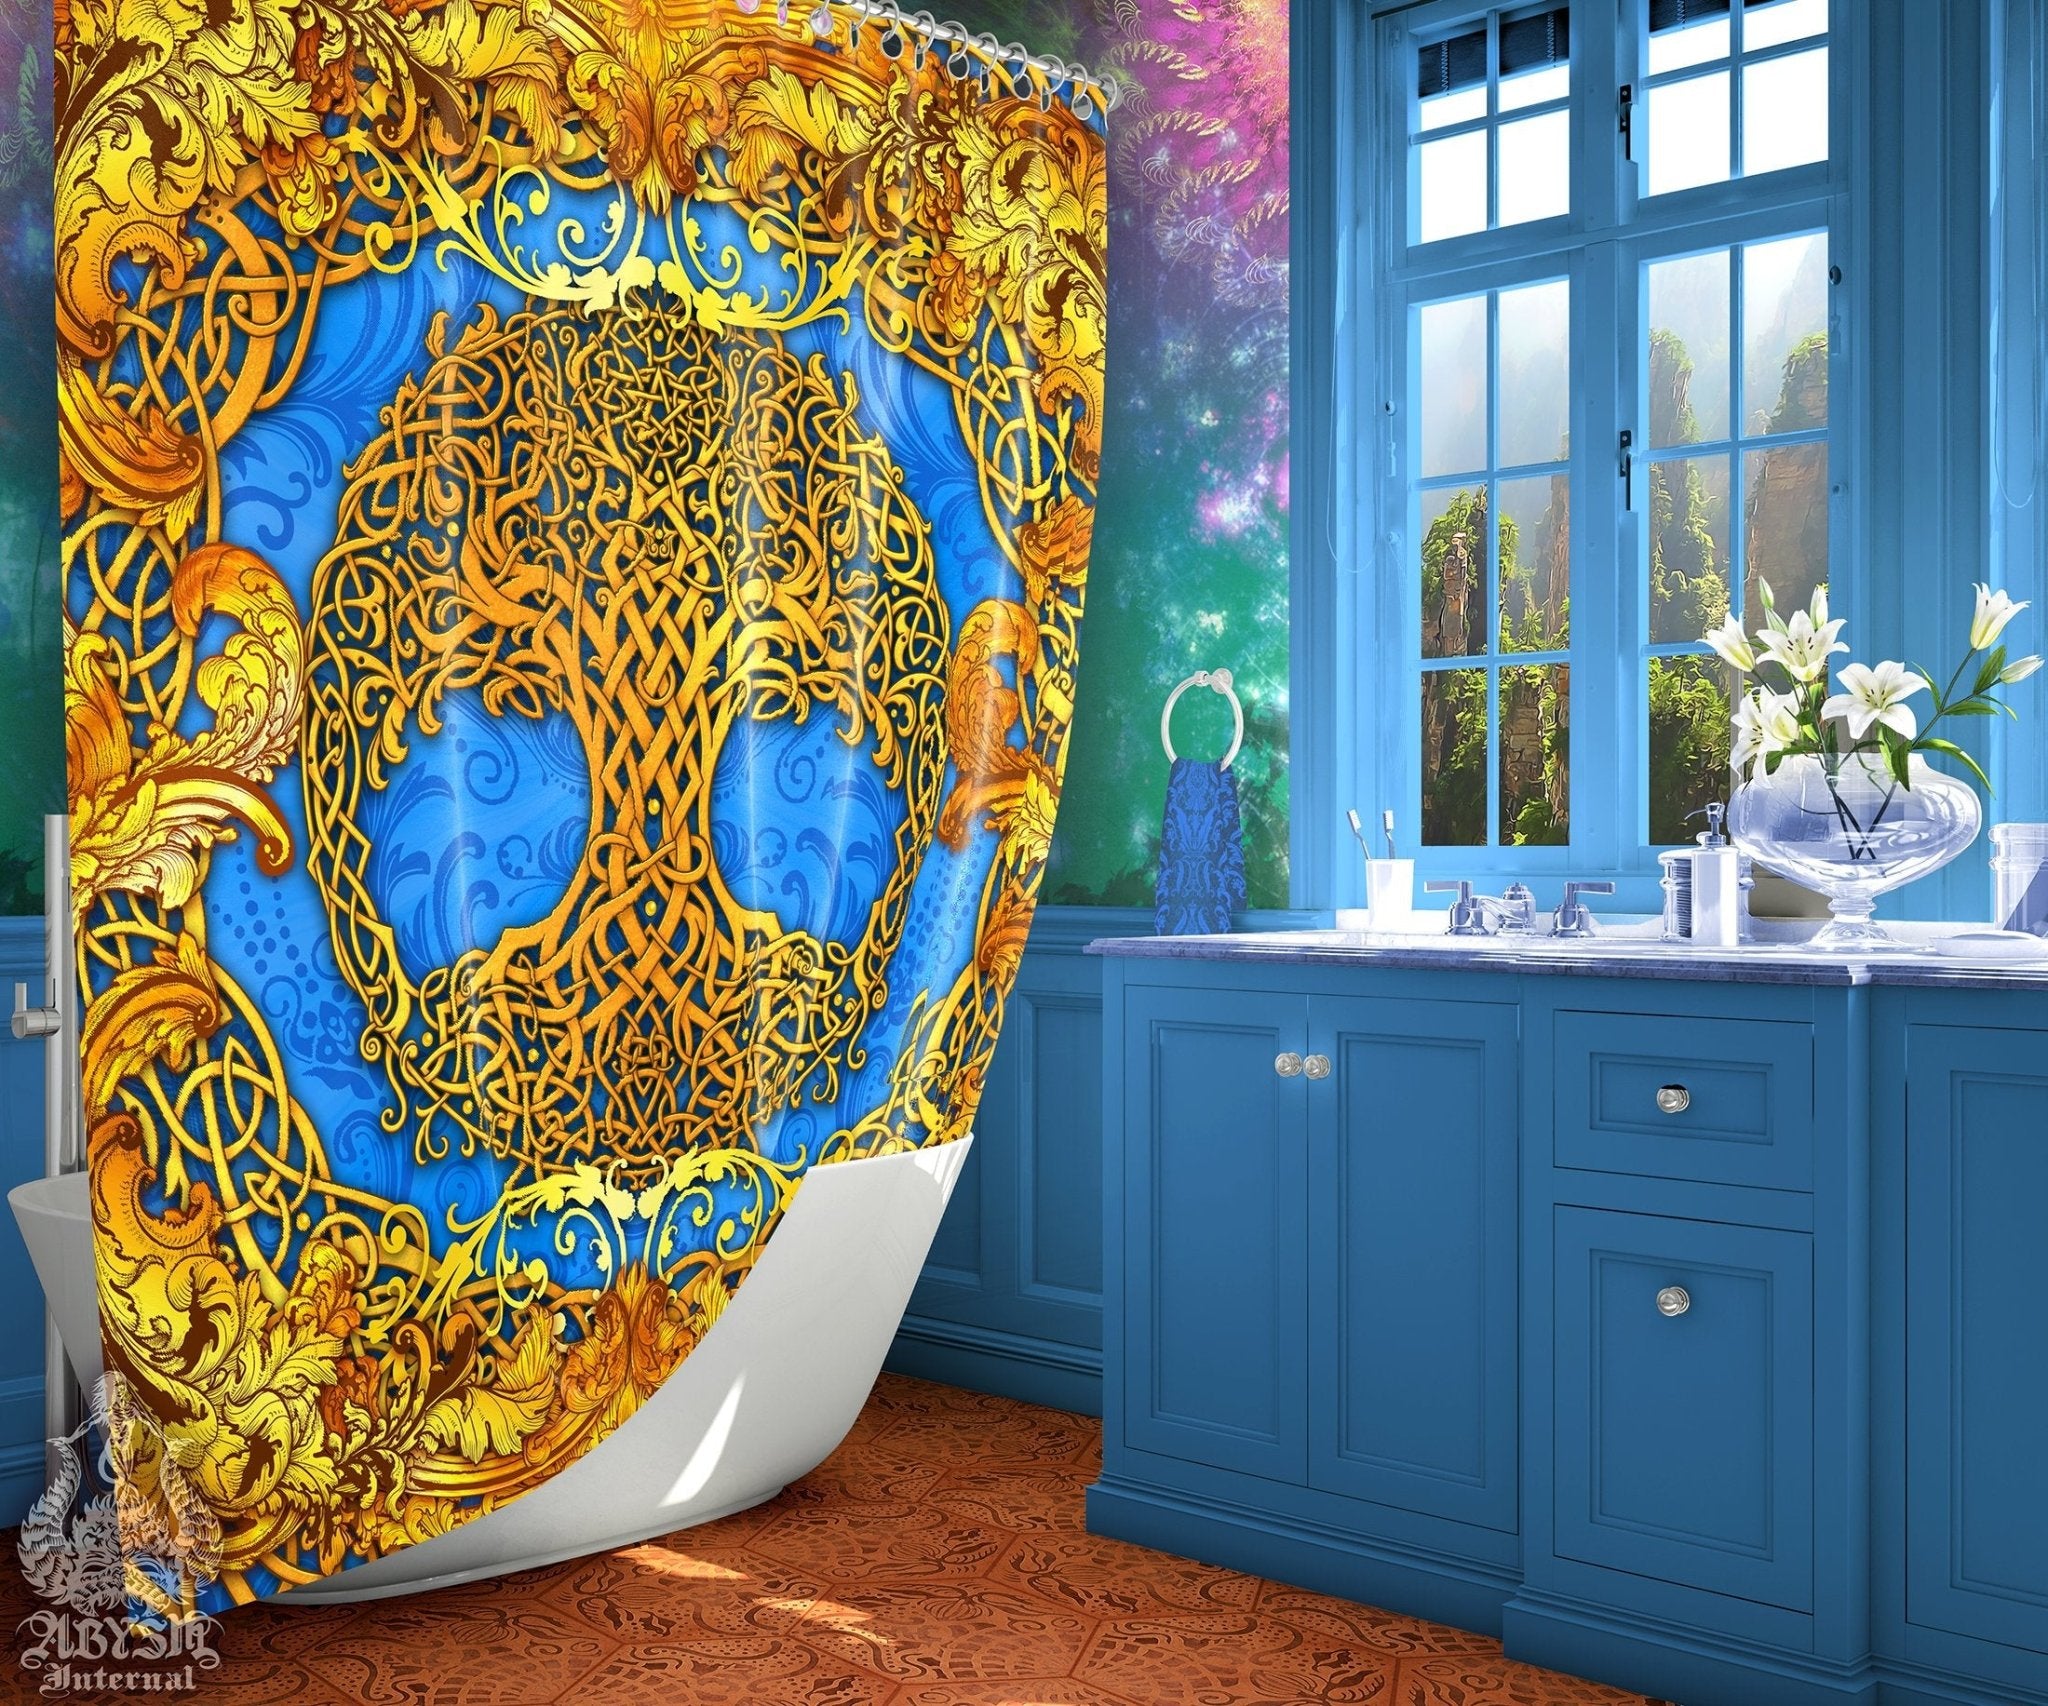 Pagan Shower Curtain, Boho and Hippie Bathroom Decor, Tree of Life, Celtic Knot, Eclectic and Funky Home - Cyan & Gold - Abysm Internal